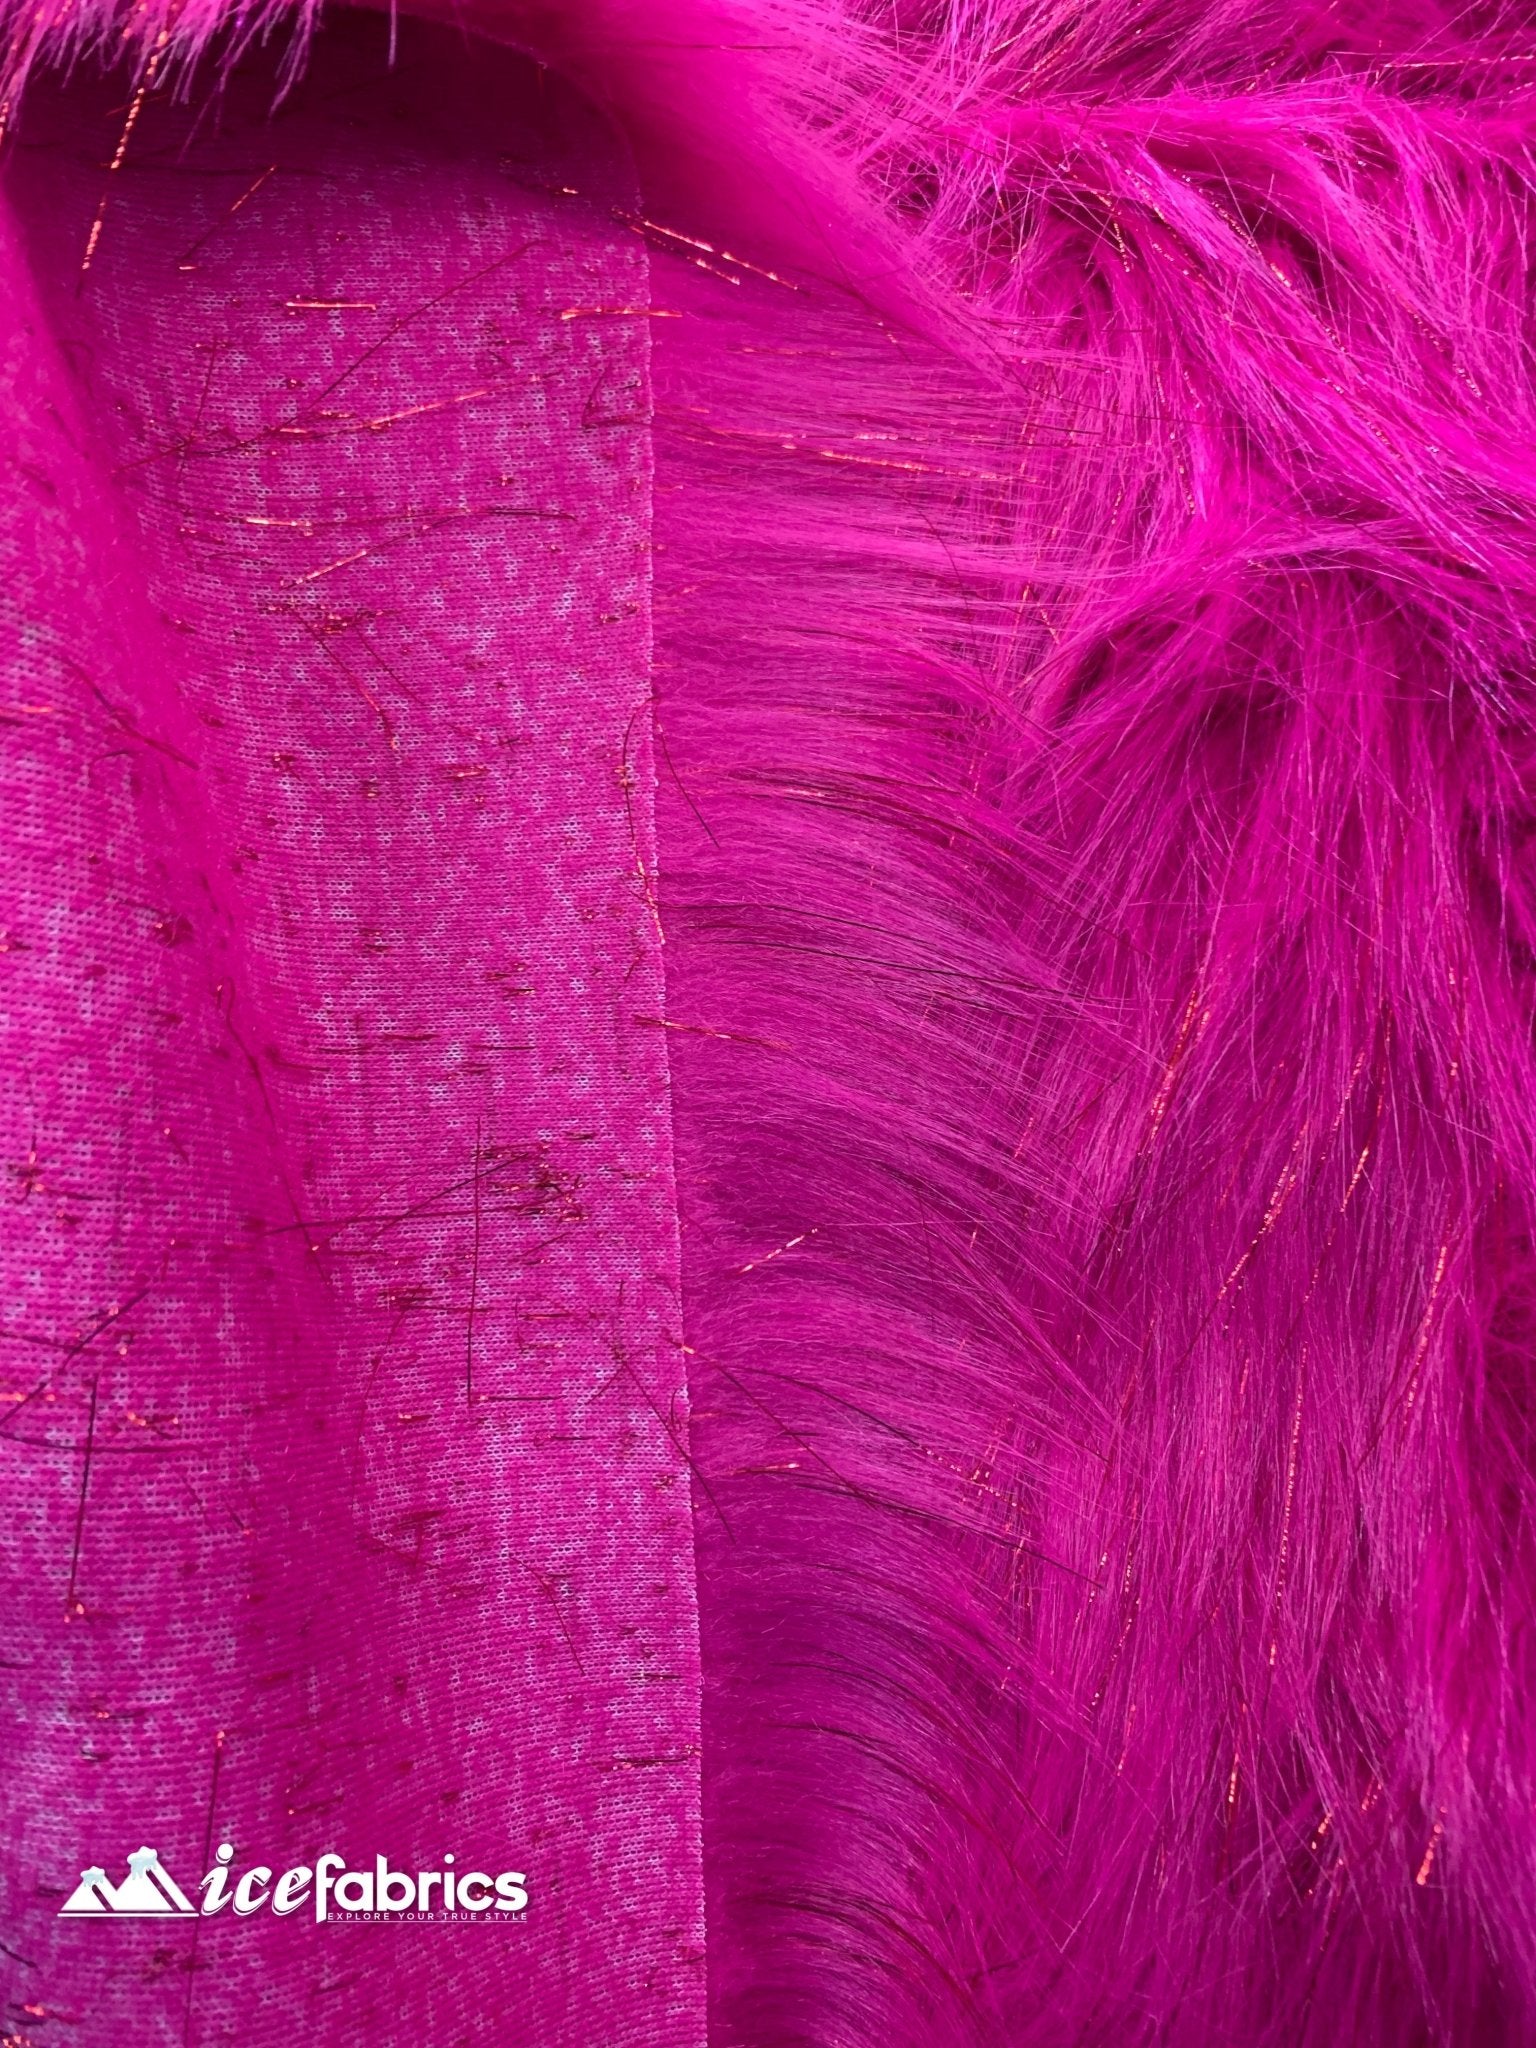 Tinsel Long Pile Mongolian Faux Fur Fabric By The Yard Fashion FabricICEFABRICICE FABRICSFuchsiaBy The Yard (60 inches Wide)Tinsel Long Pile Mongolian Faux Fur Fabric By The Yard Fashion Fabric ICEFABRIC